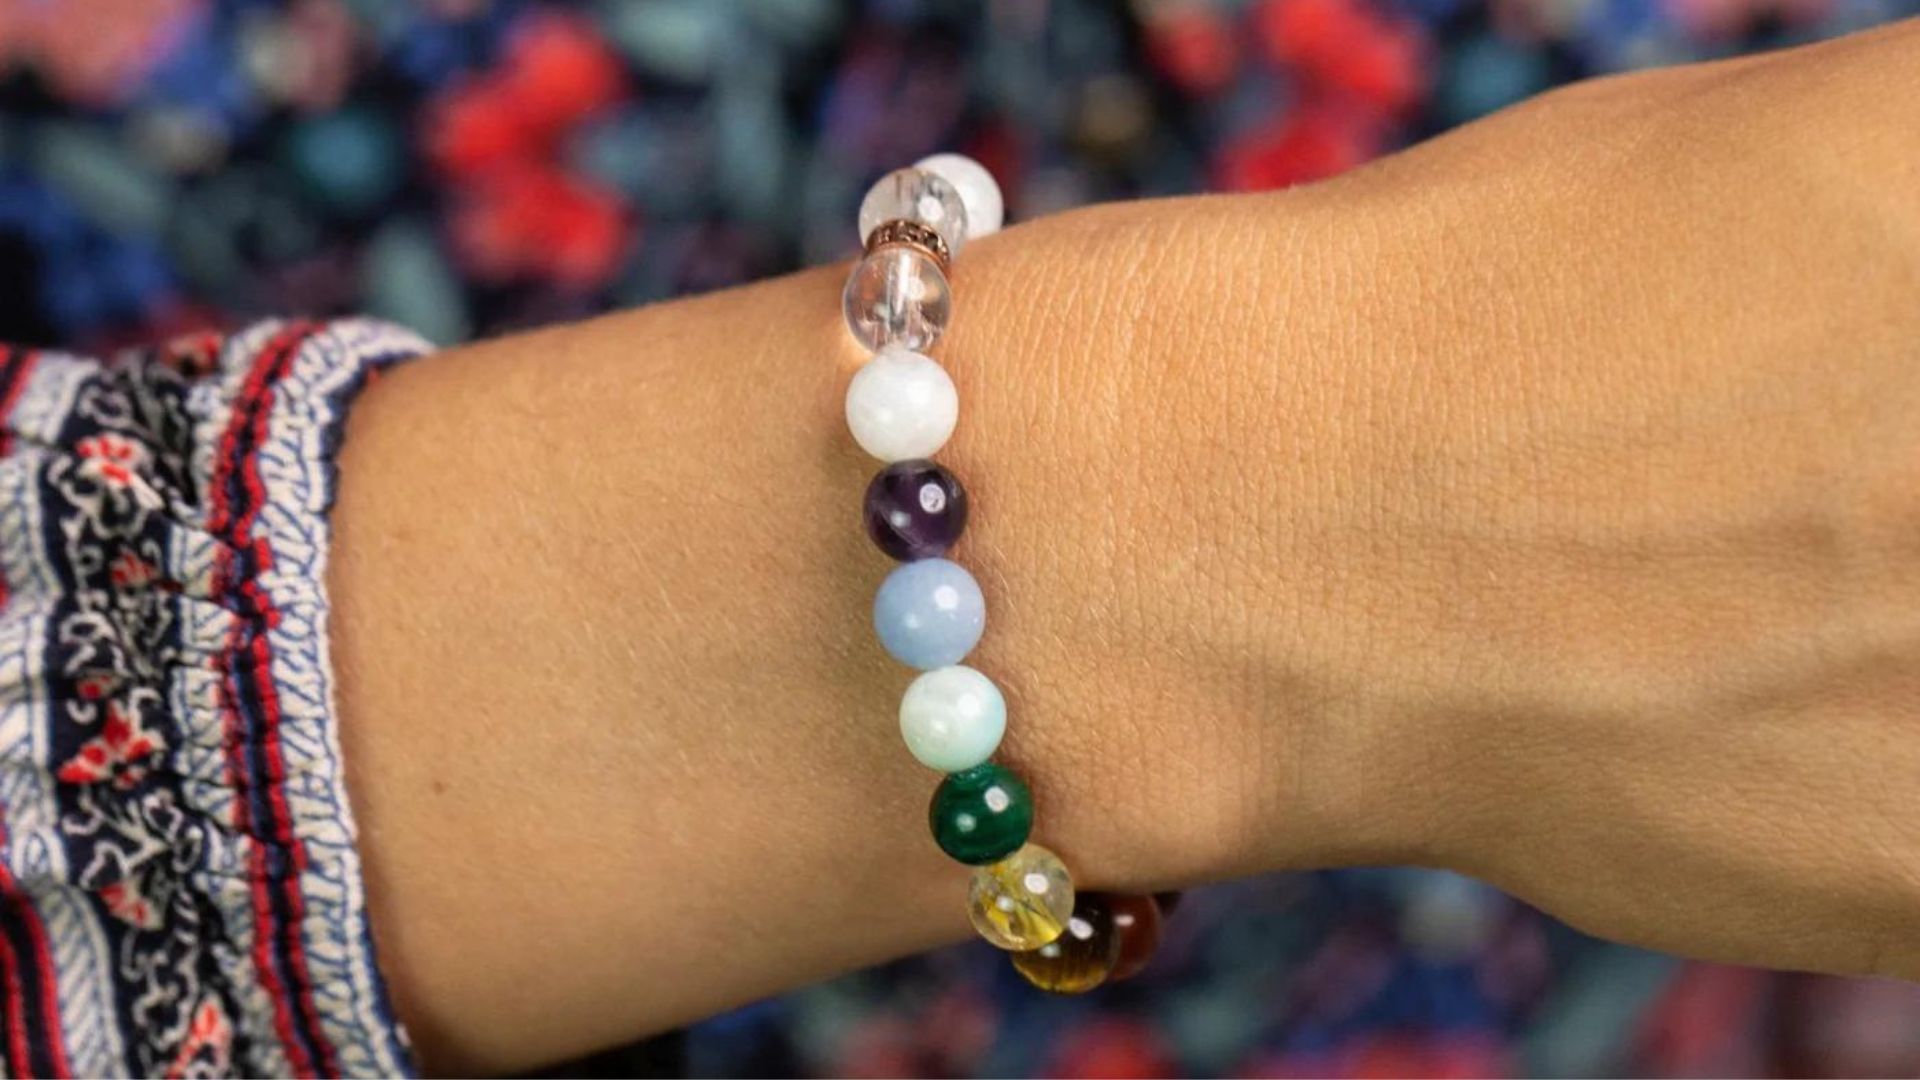 A Woman Wearing Bracelet With Multi Color Beads